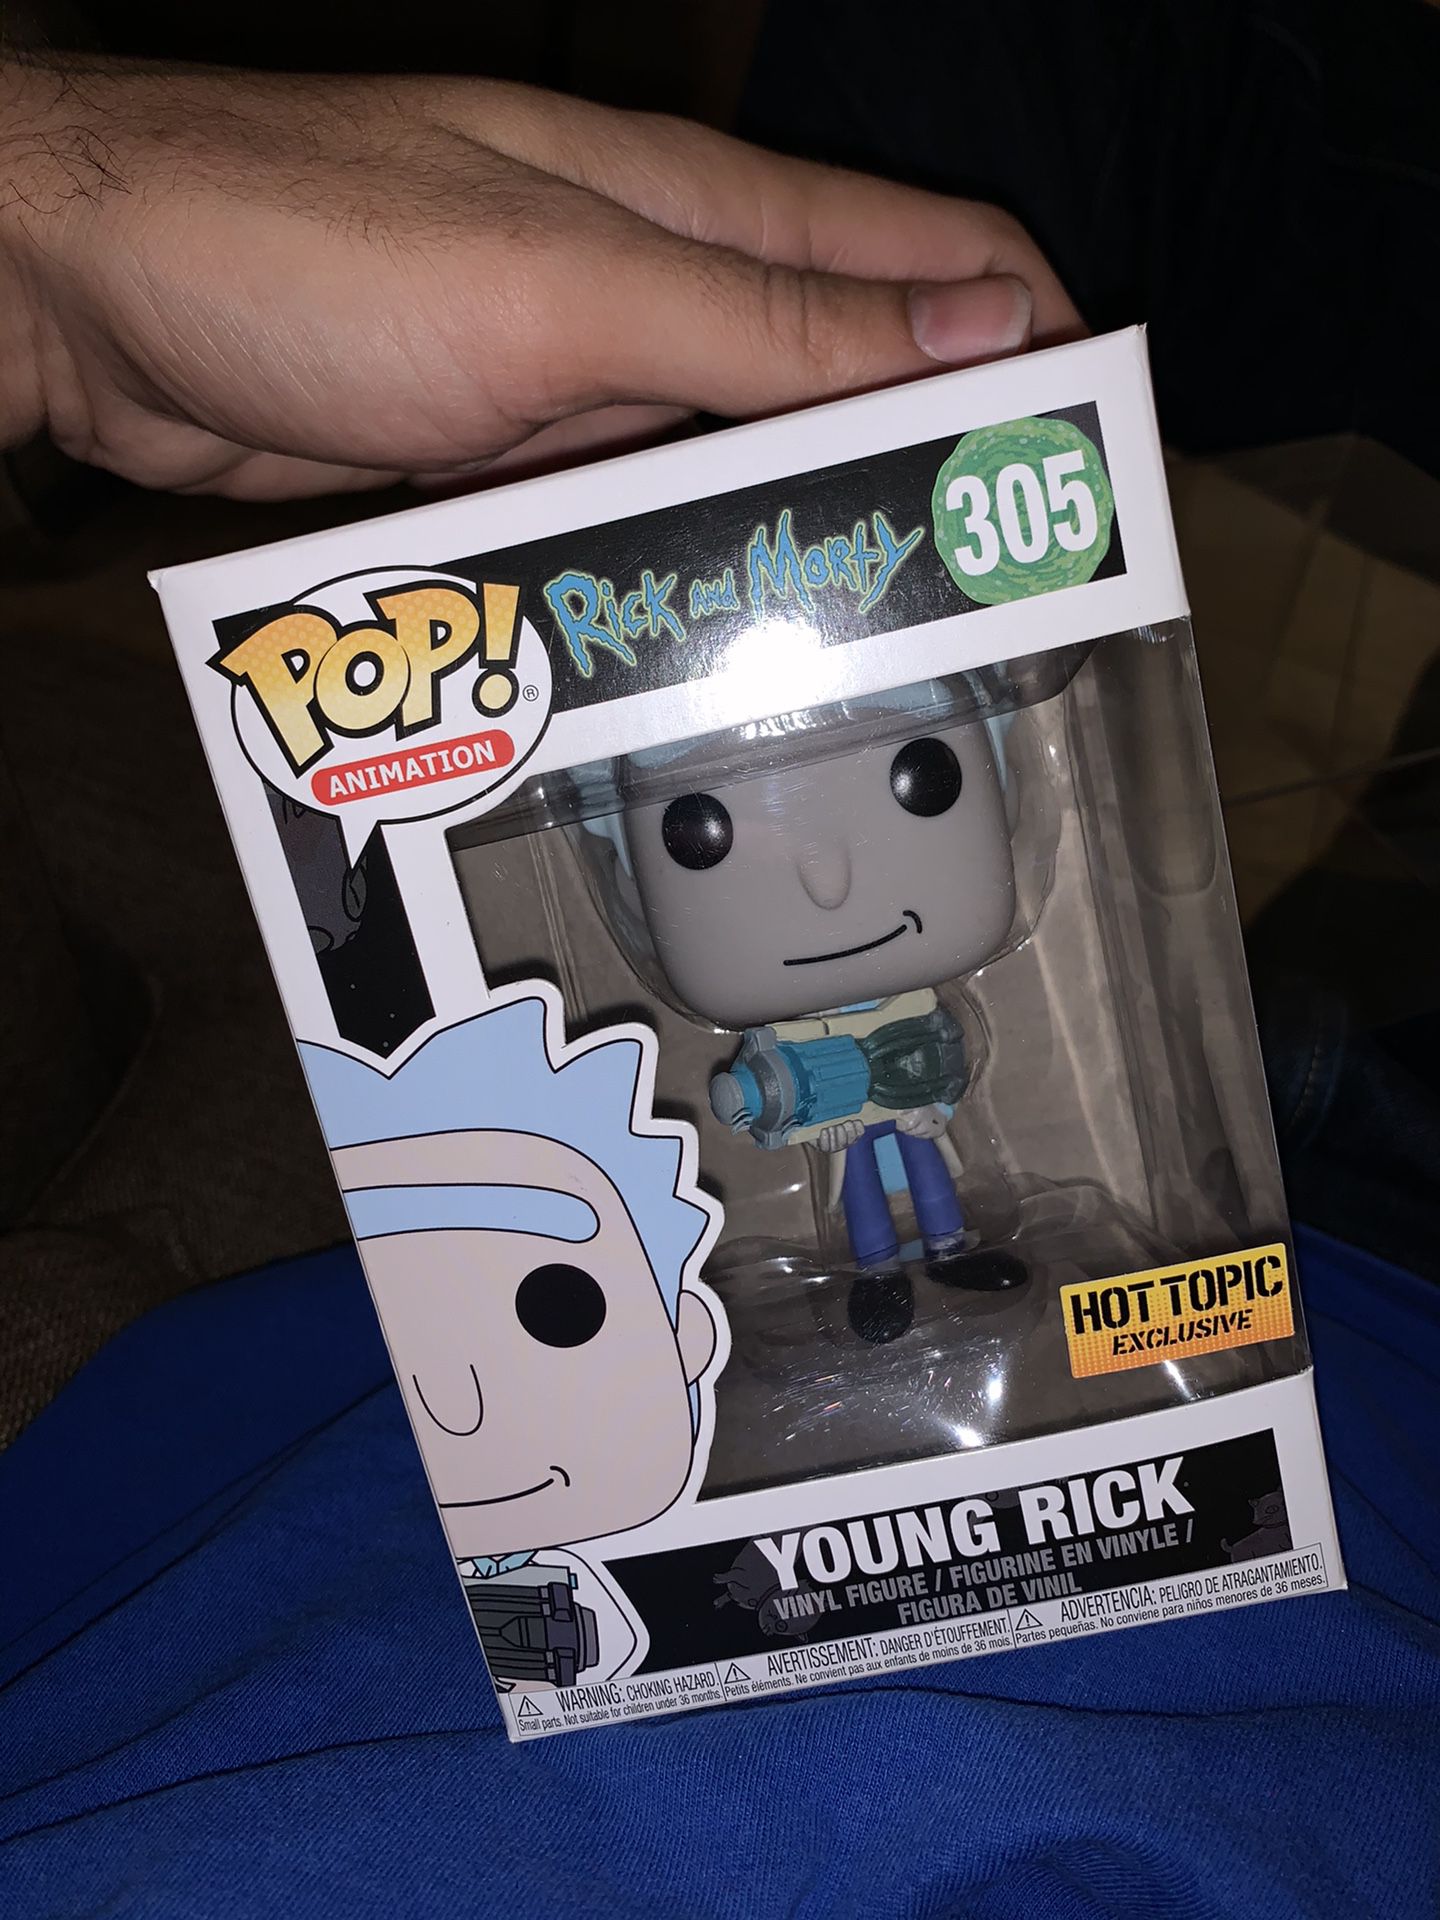 Young Rick, Pop!, Animation, Rick and Morty, 305, Hot Topic, Exclusive